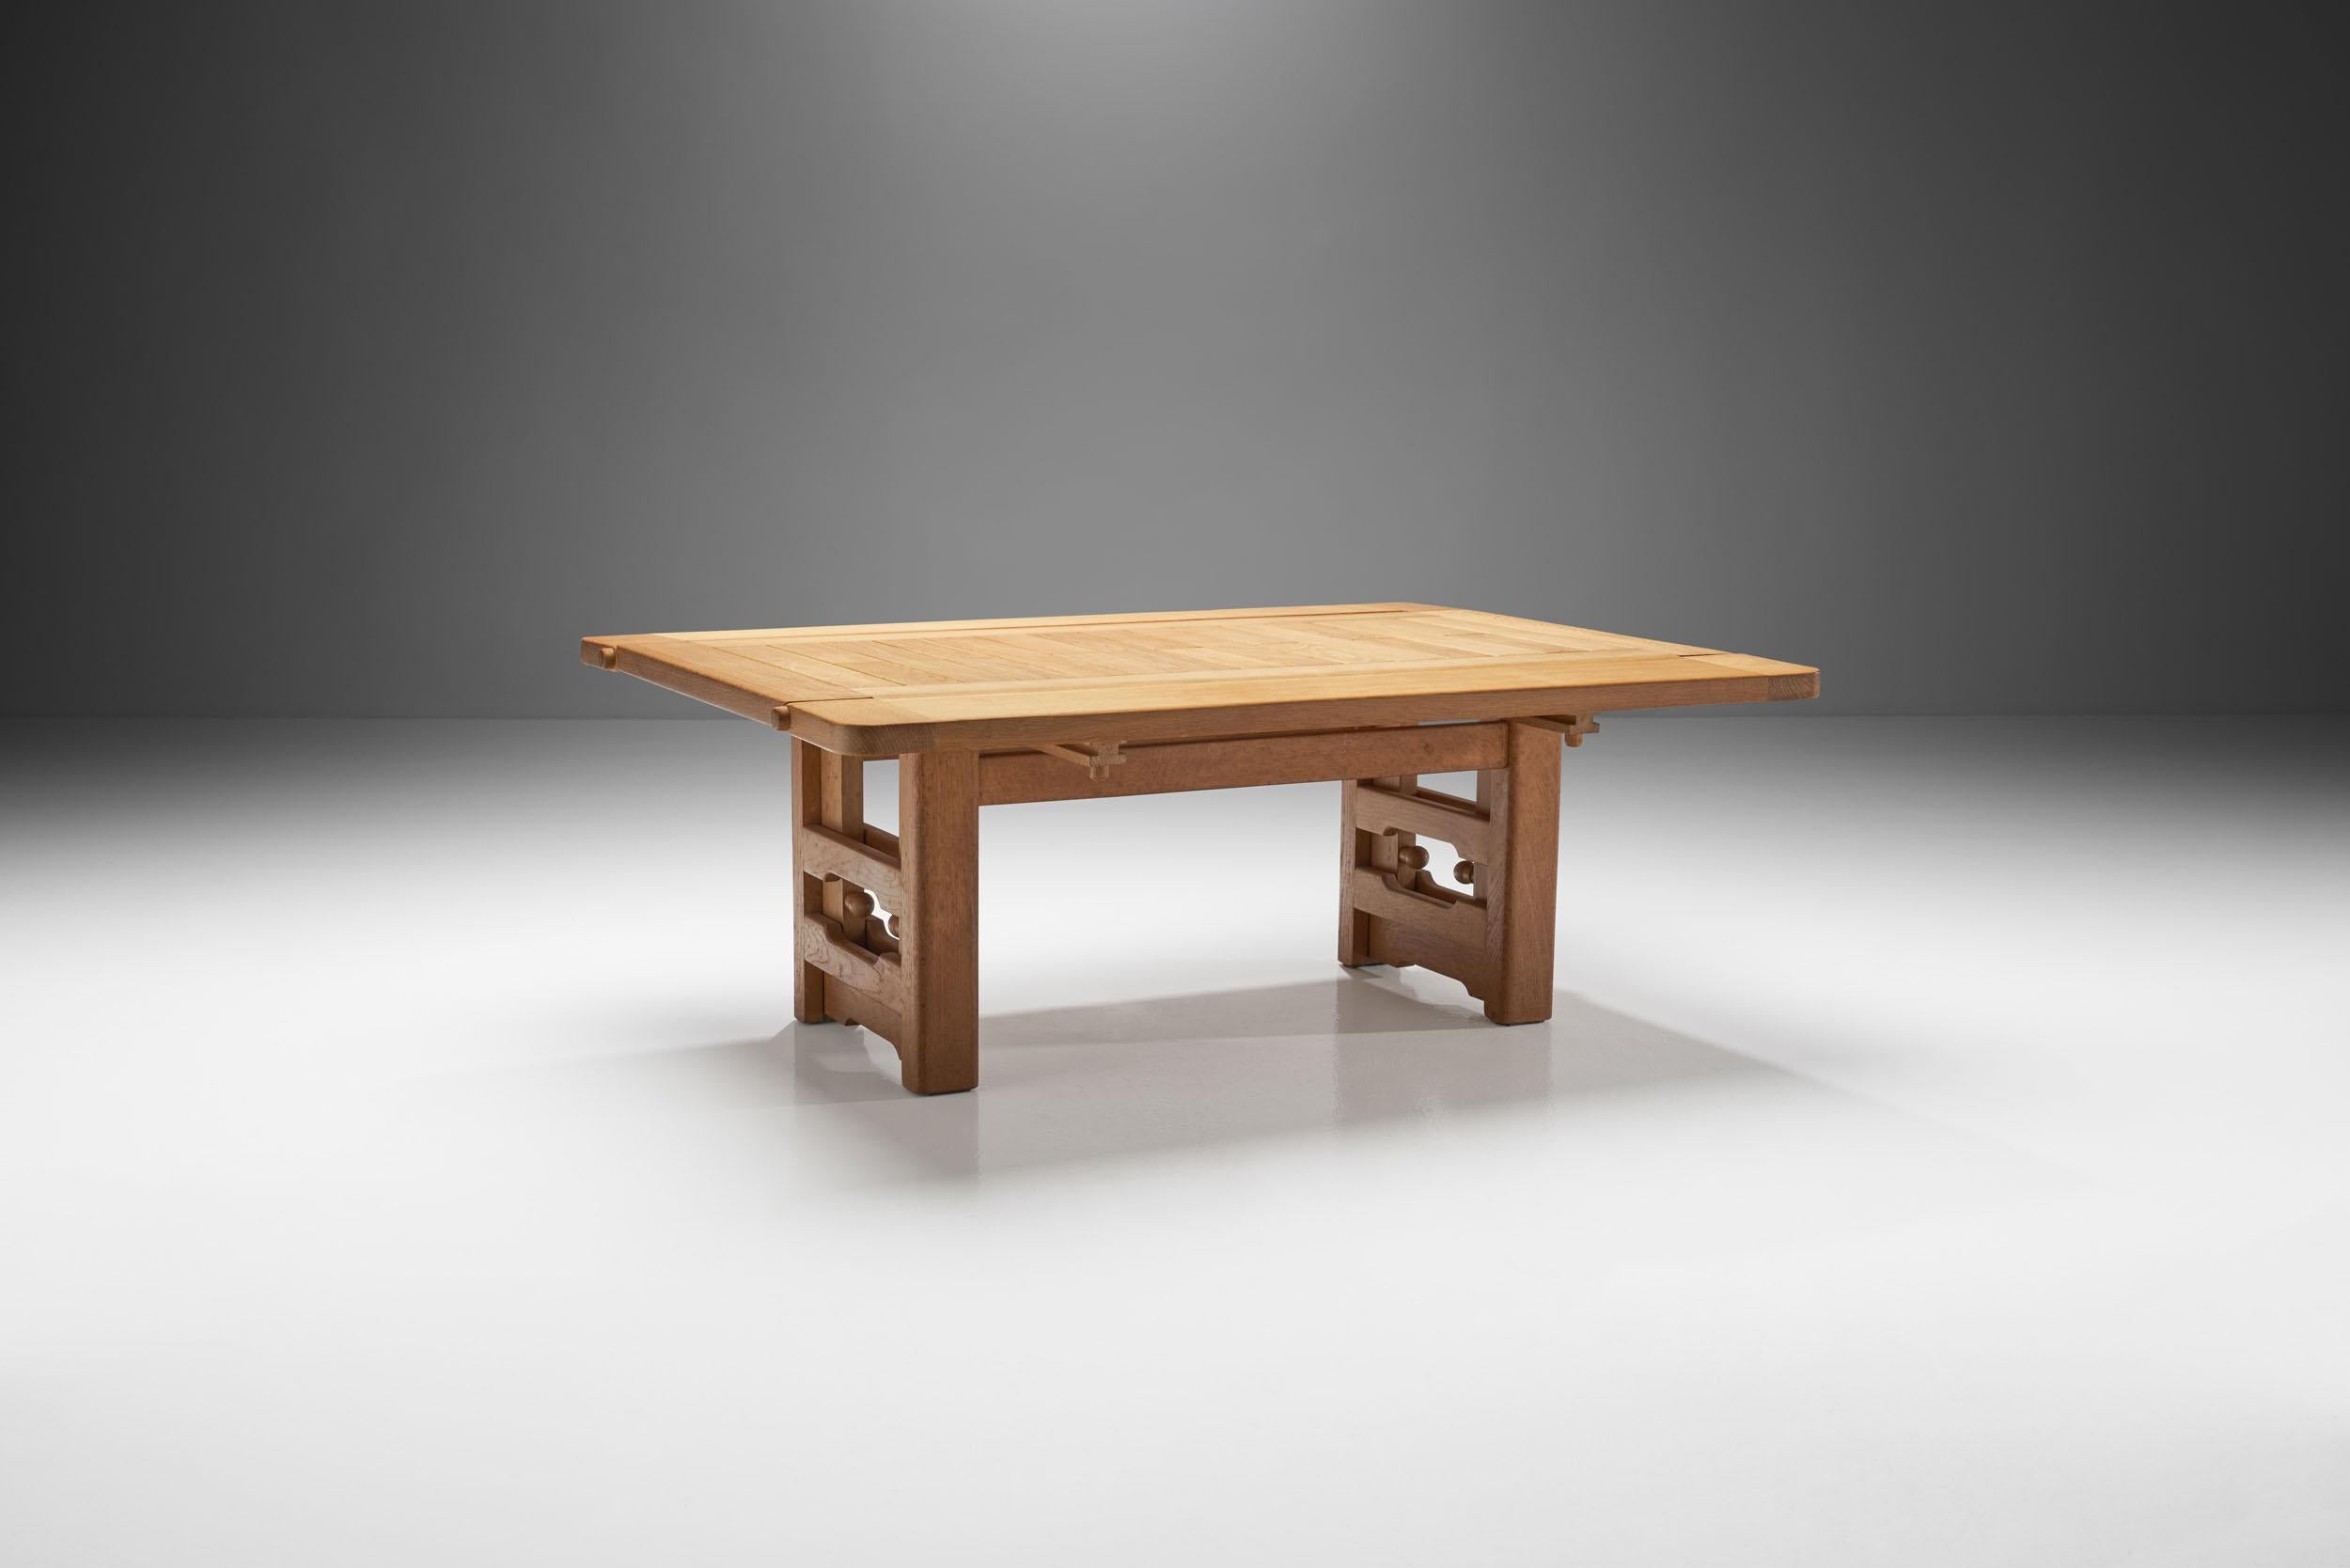 Solid oak “Sébastien” table by French designers Guillerme et Chambron, by Votre Maison France. This modular model is adjustable in height and width as well. Thanks to its creative design, this table can be adjusted to be a coffee, desk or dining